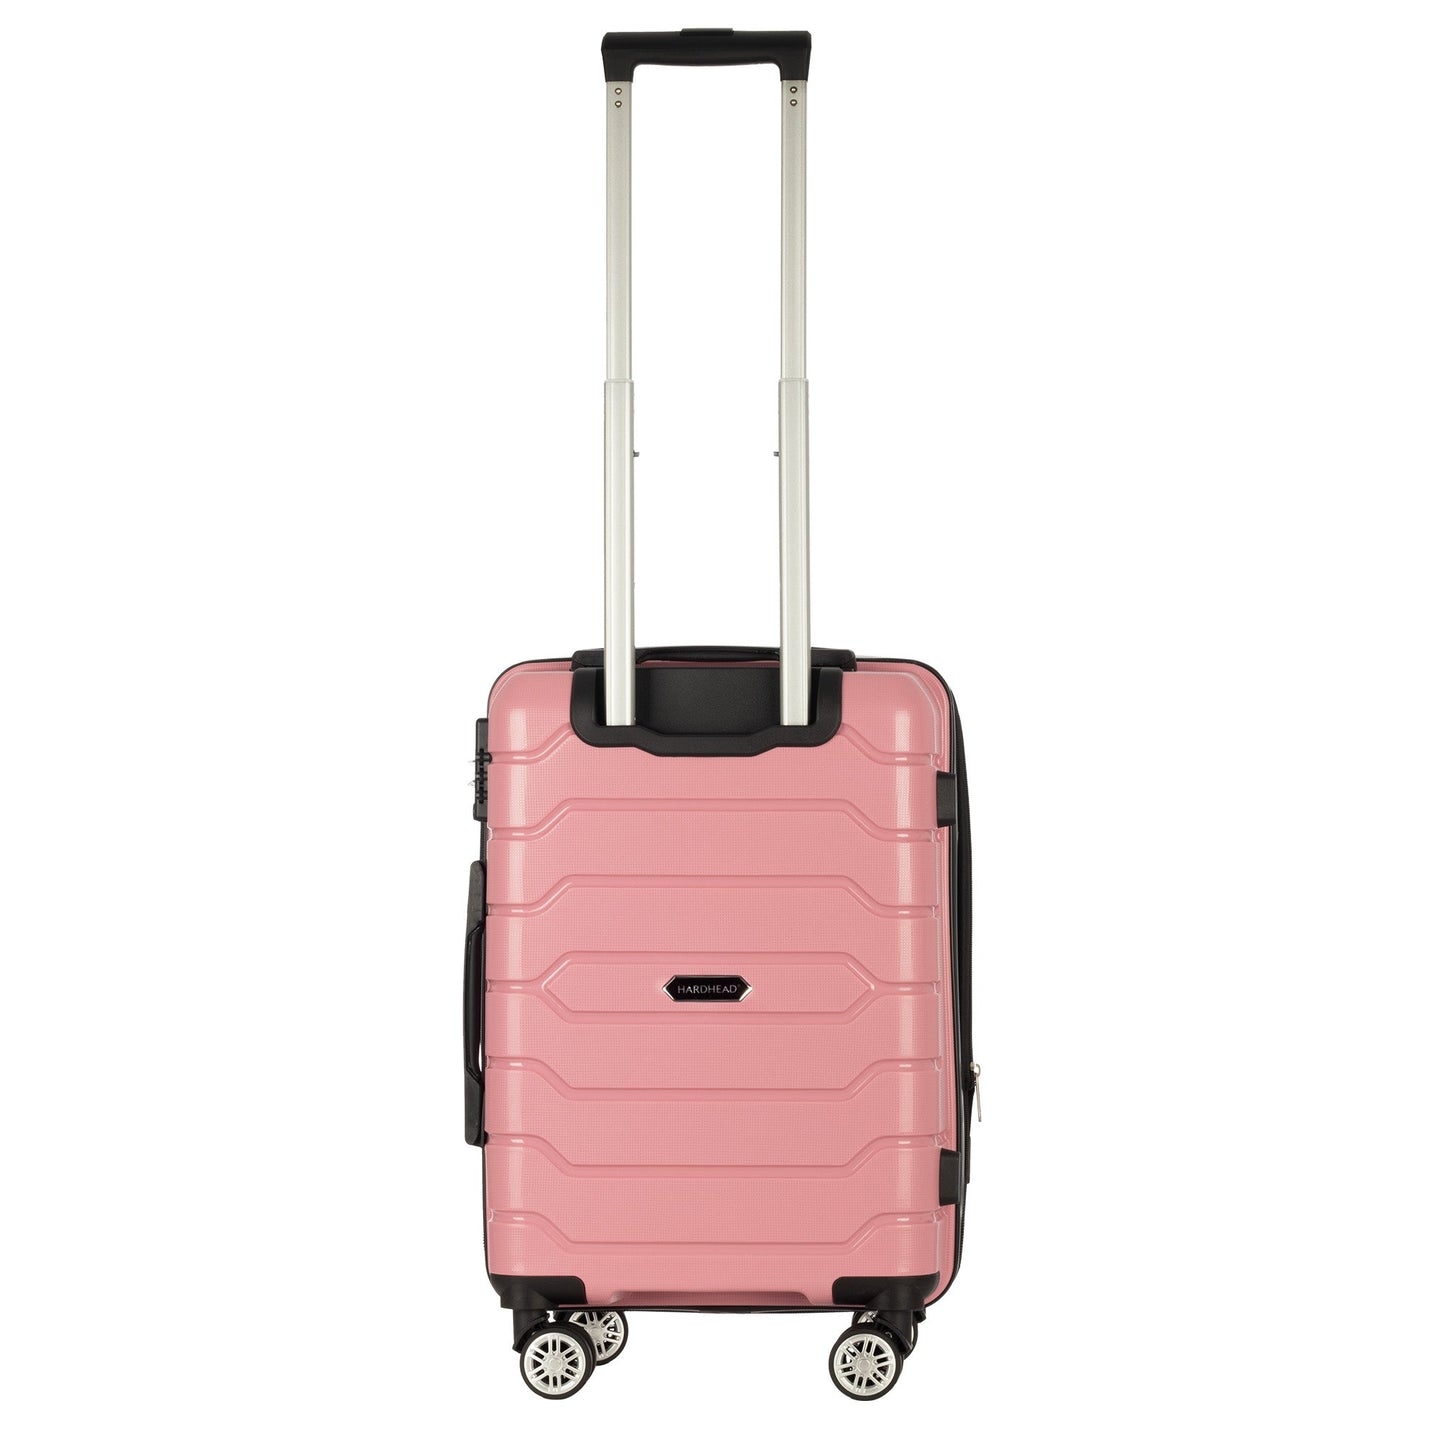 Ian collection luggage pink (18") Suitcase Lock Spinner